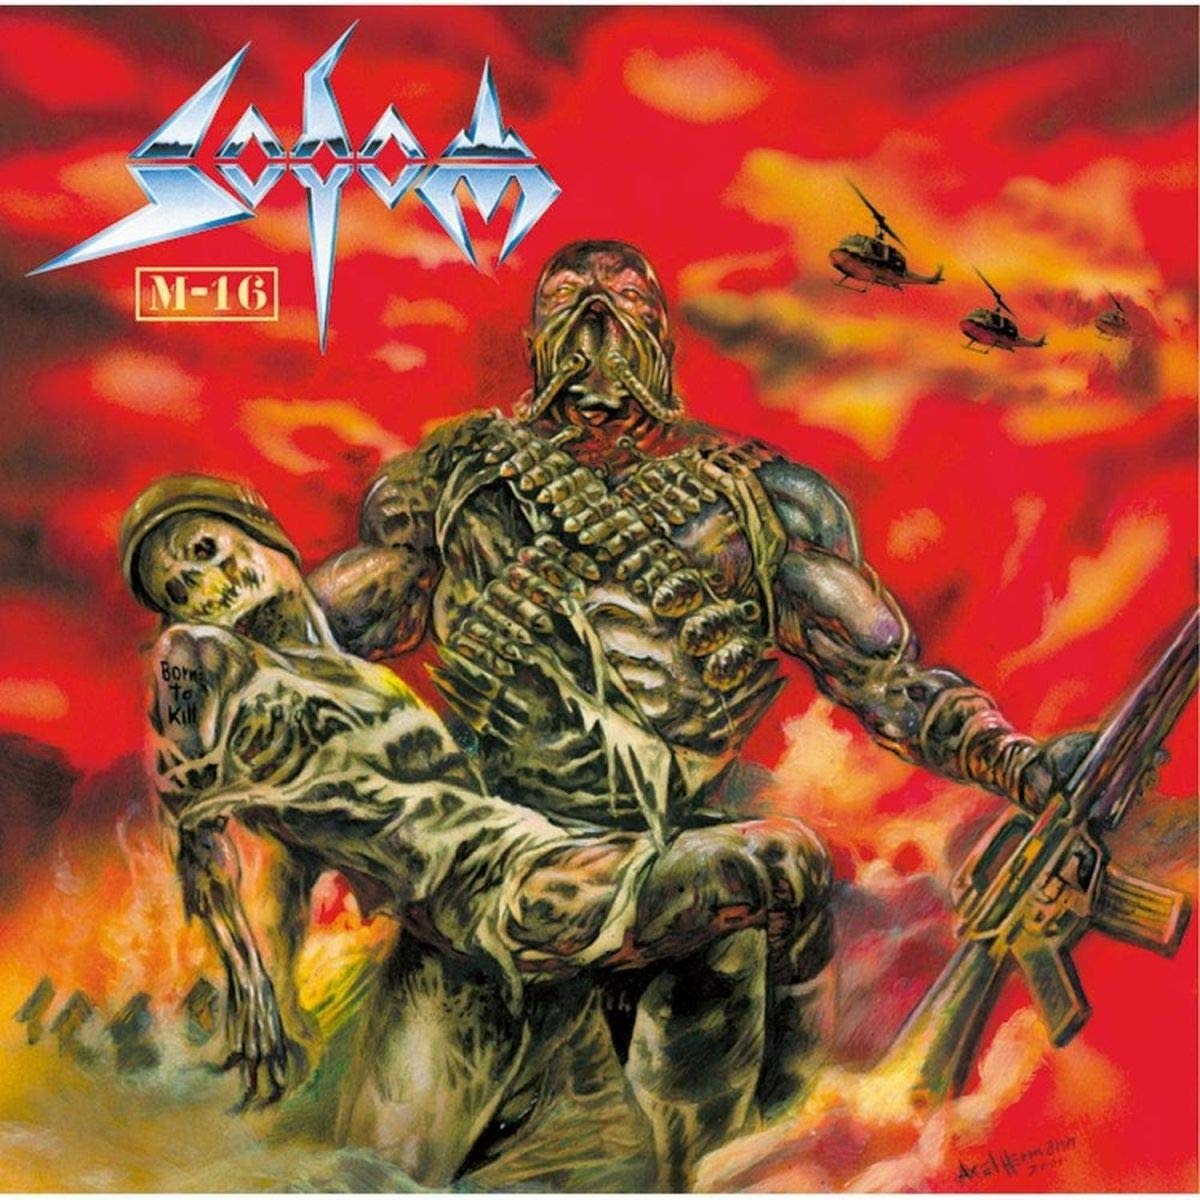 review-of-the-album-m-16-by-sodom